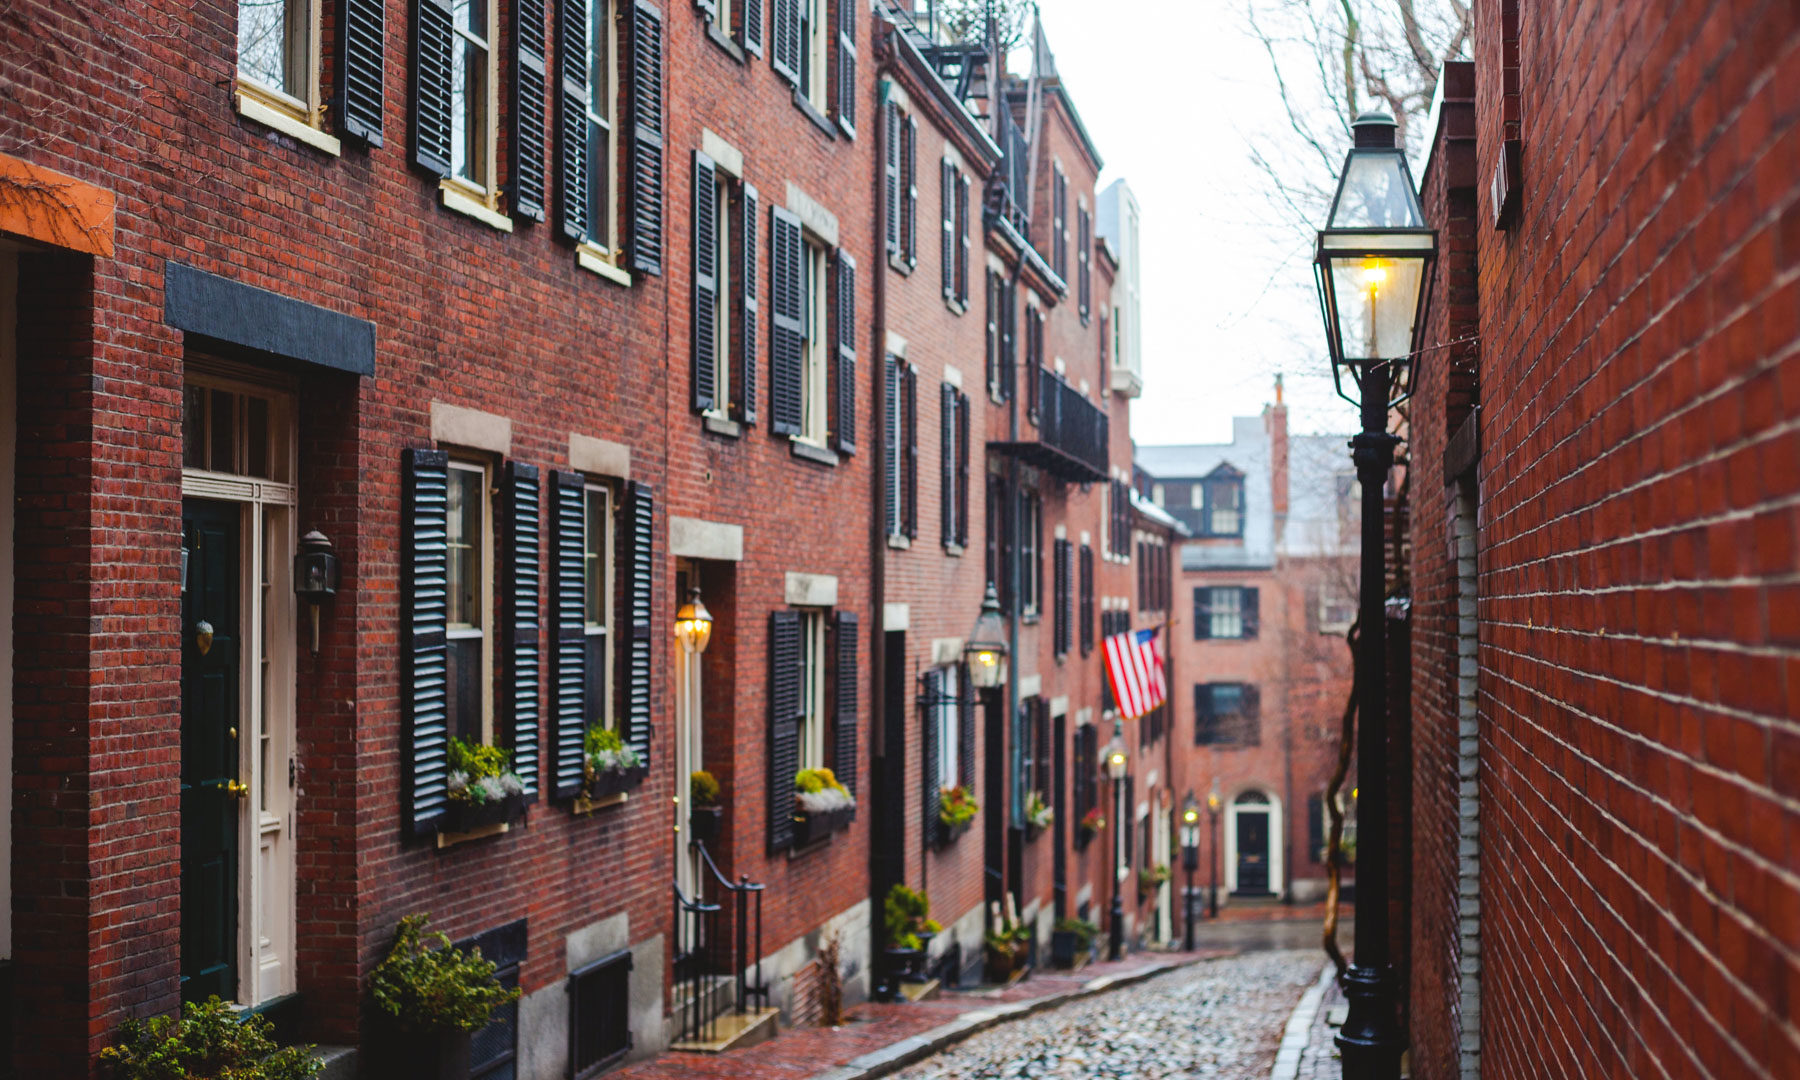 Airbnb Boston, Massachusetts: Condos, Lofts, Apartments, Bungalows, Brownstones, Townhouses, & Mansion